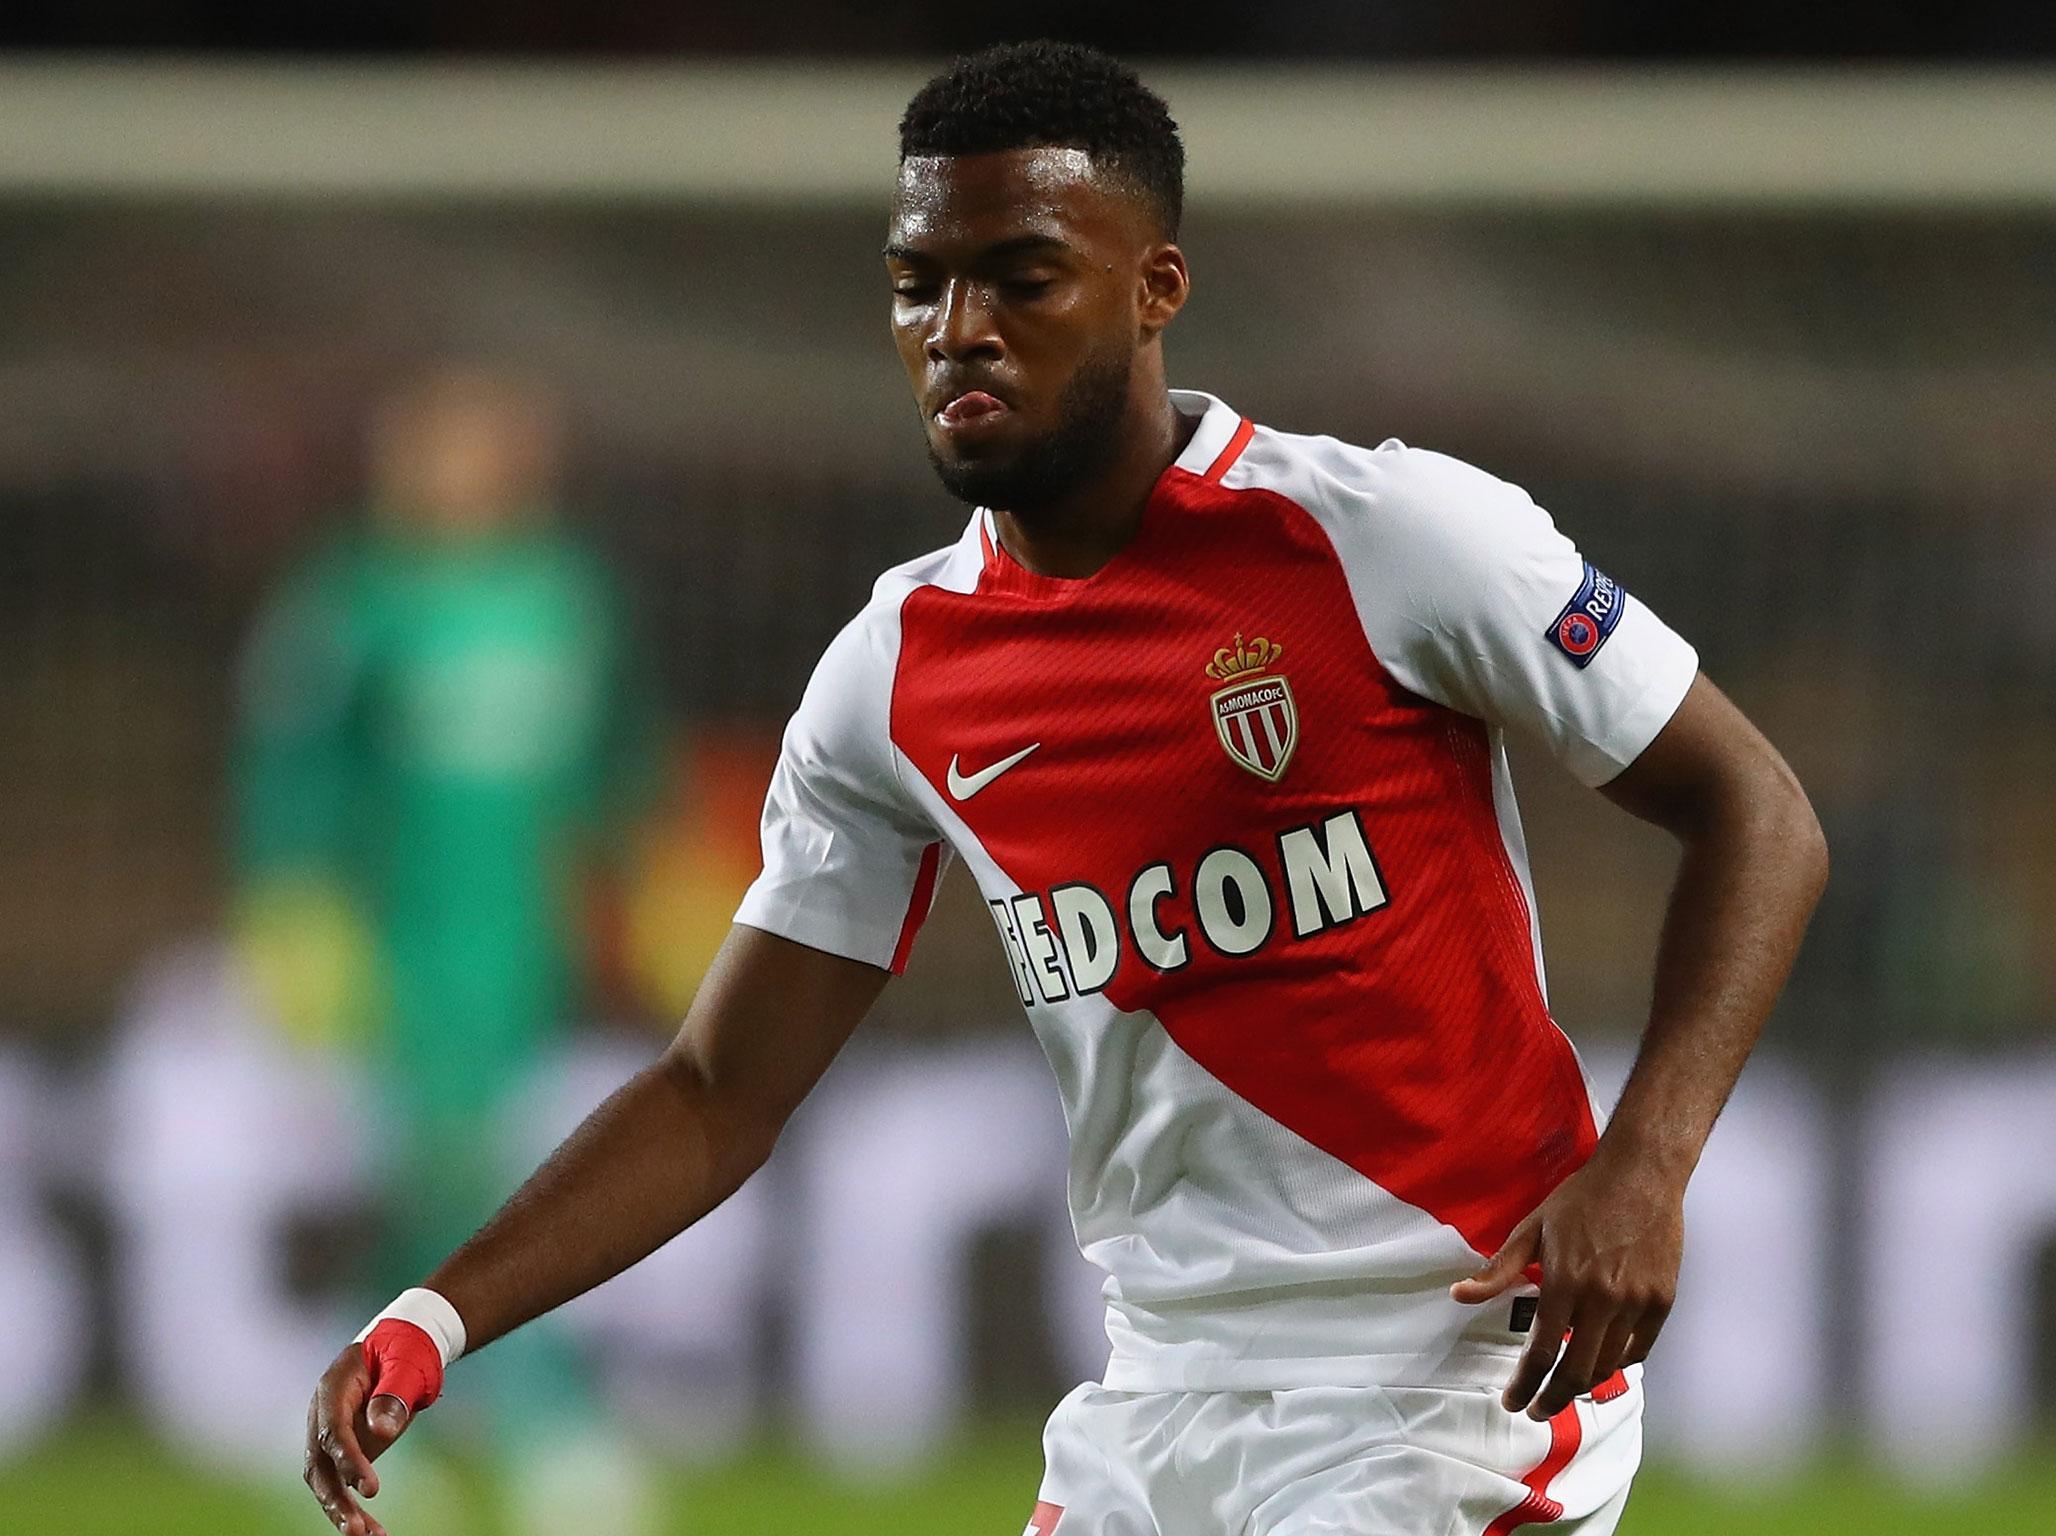 Thomas Lemar is one of the hottest properties in Europe